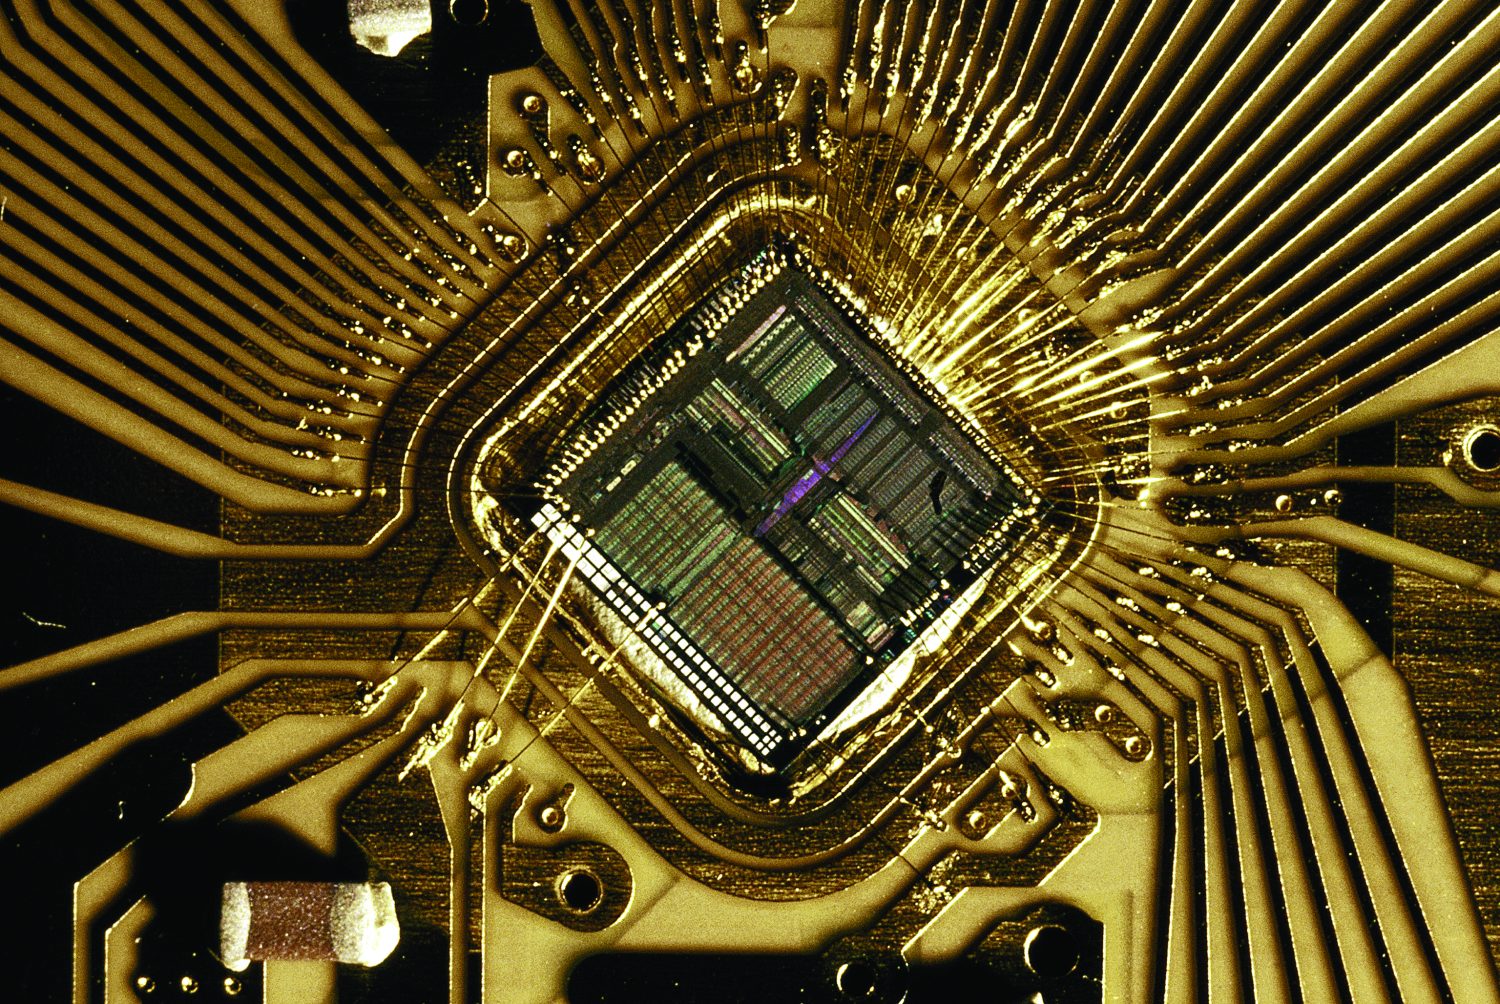 Close-up view of the 32-bit CPU developed for the HP 9000 desktop workstation.